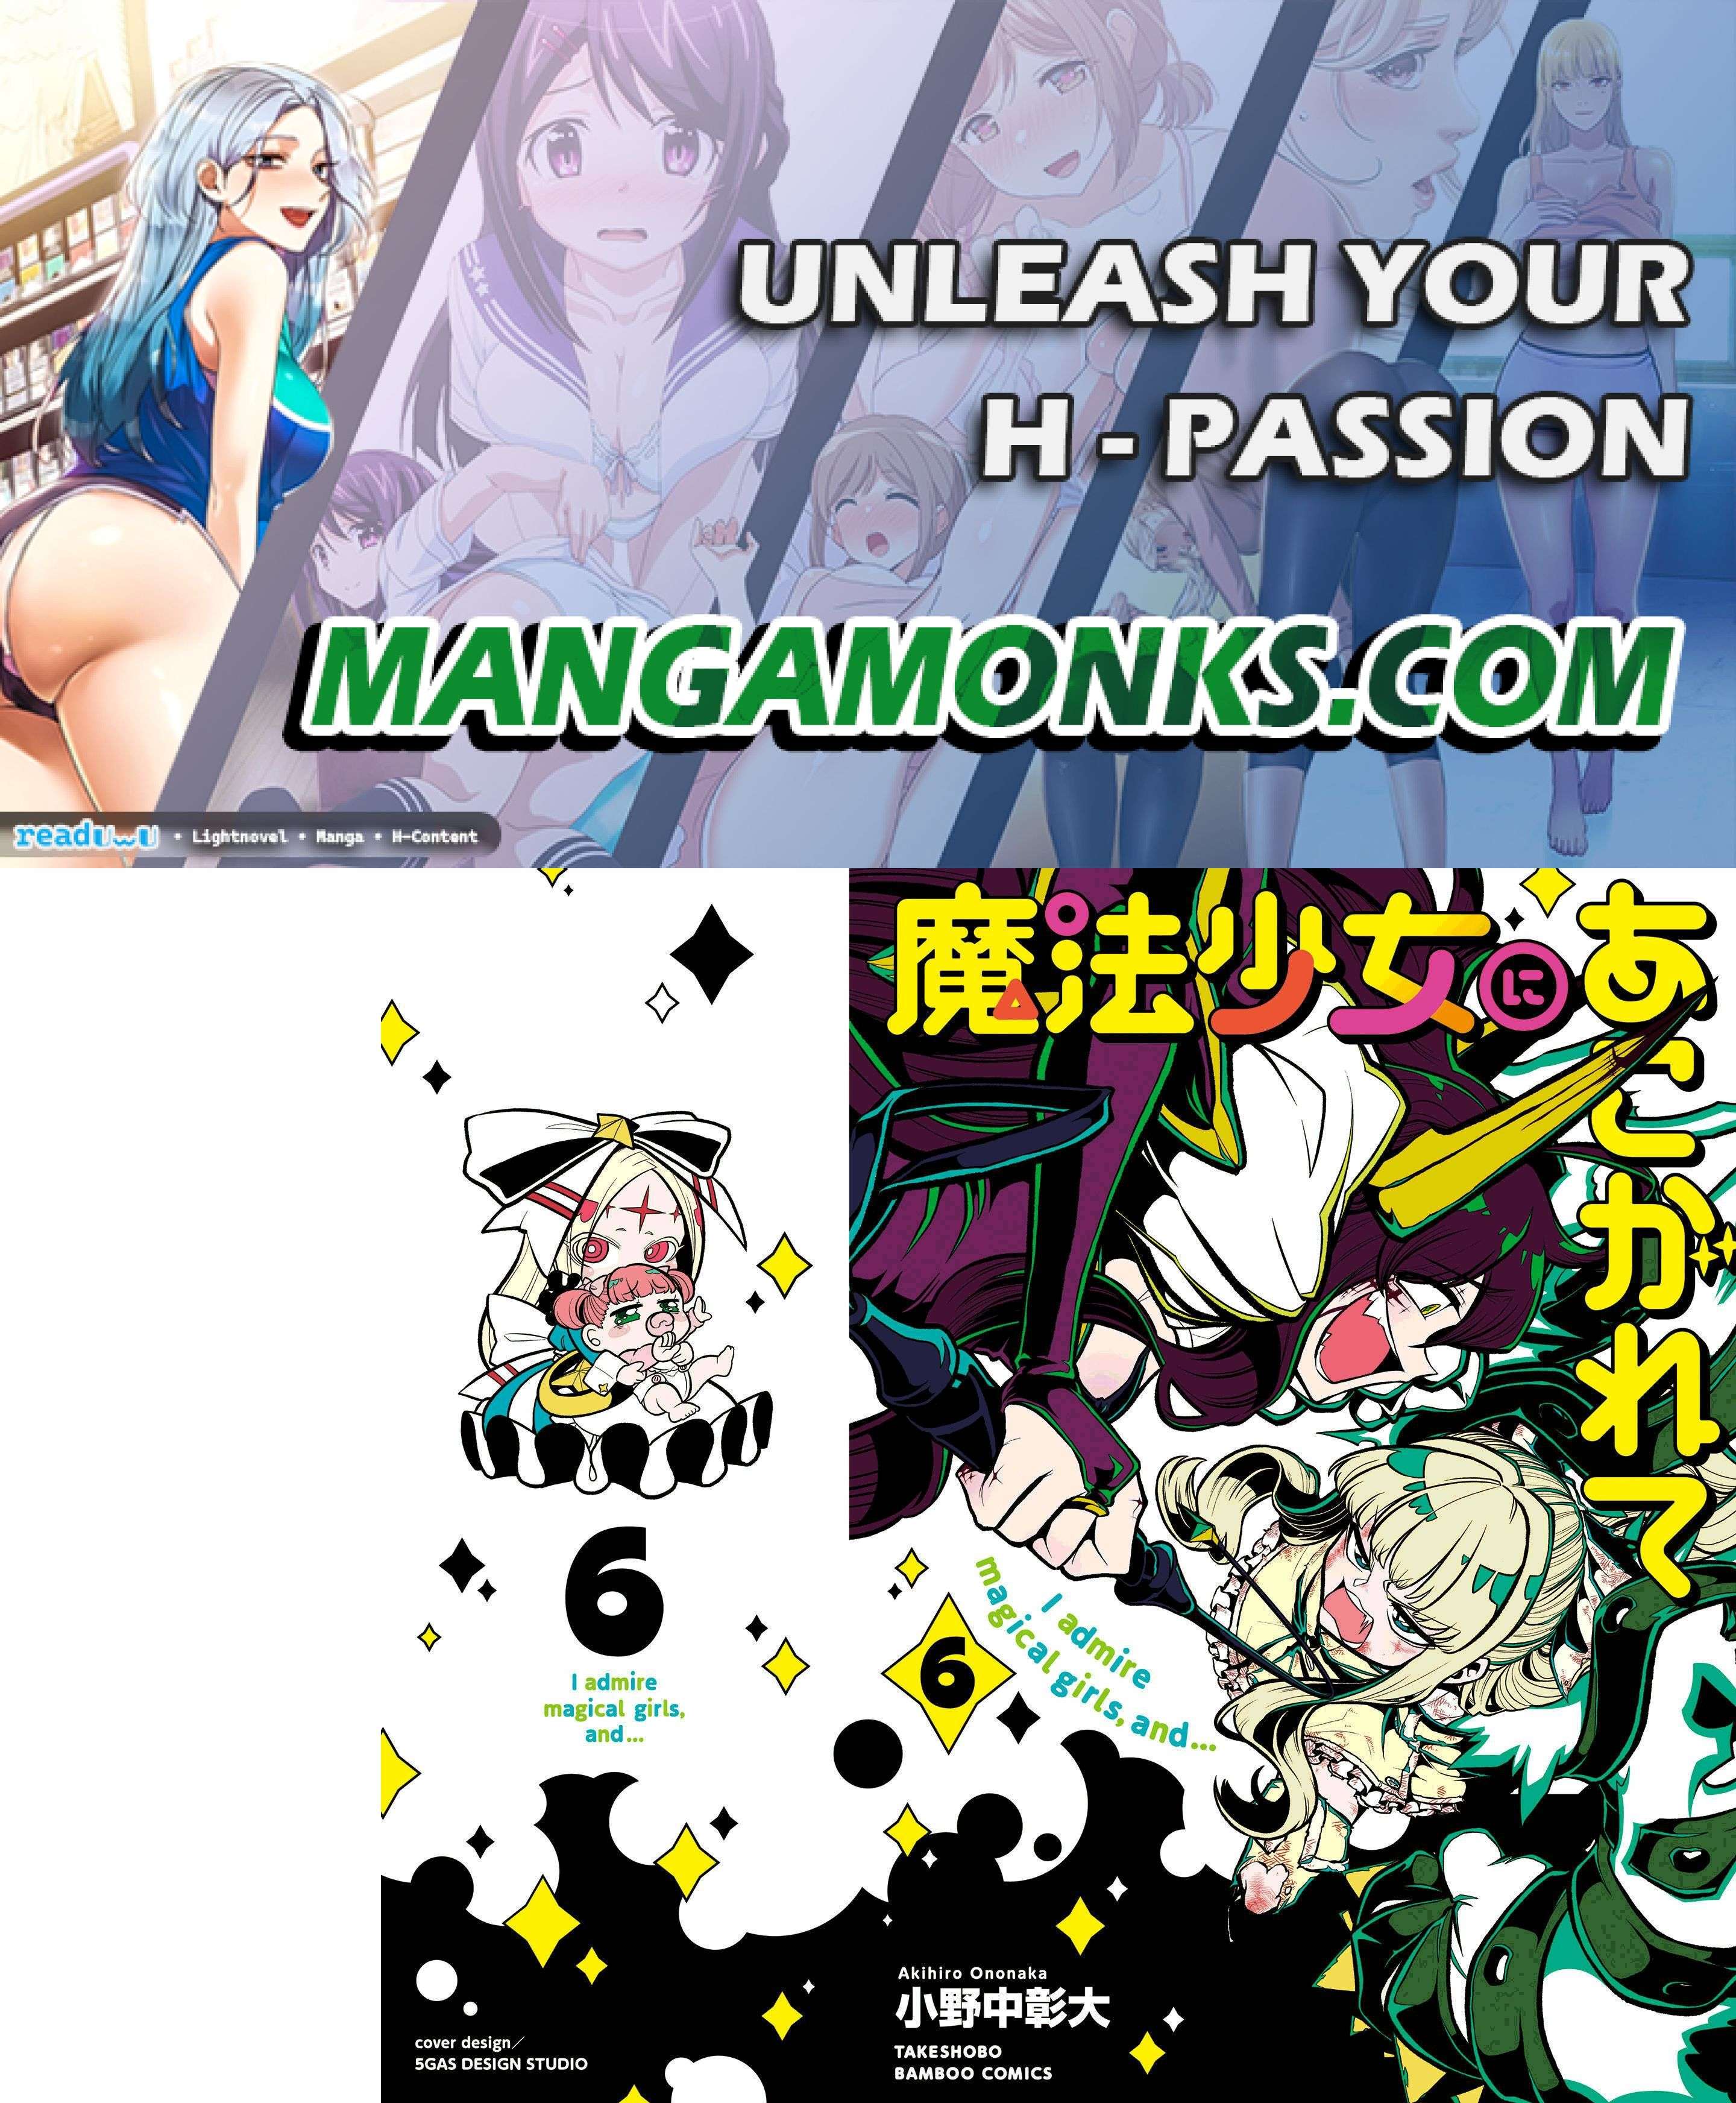 Gushing over Magical Girls - chapter 30.5 - #1